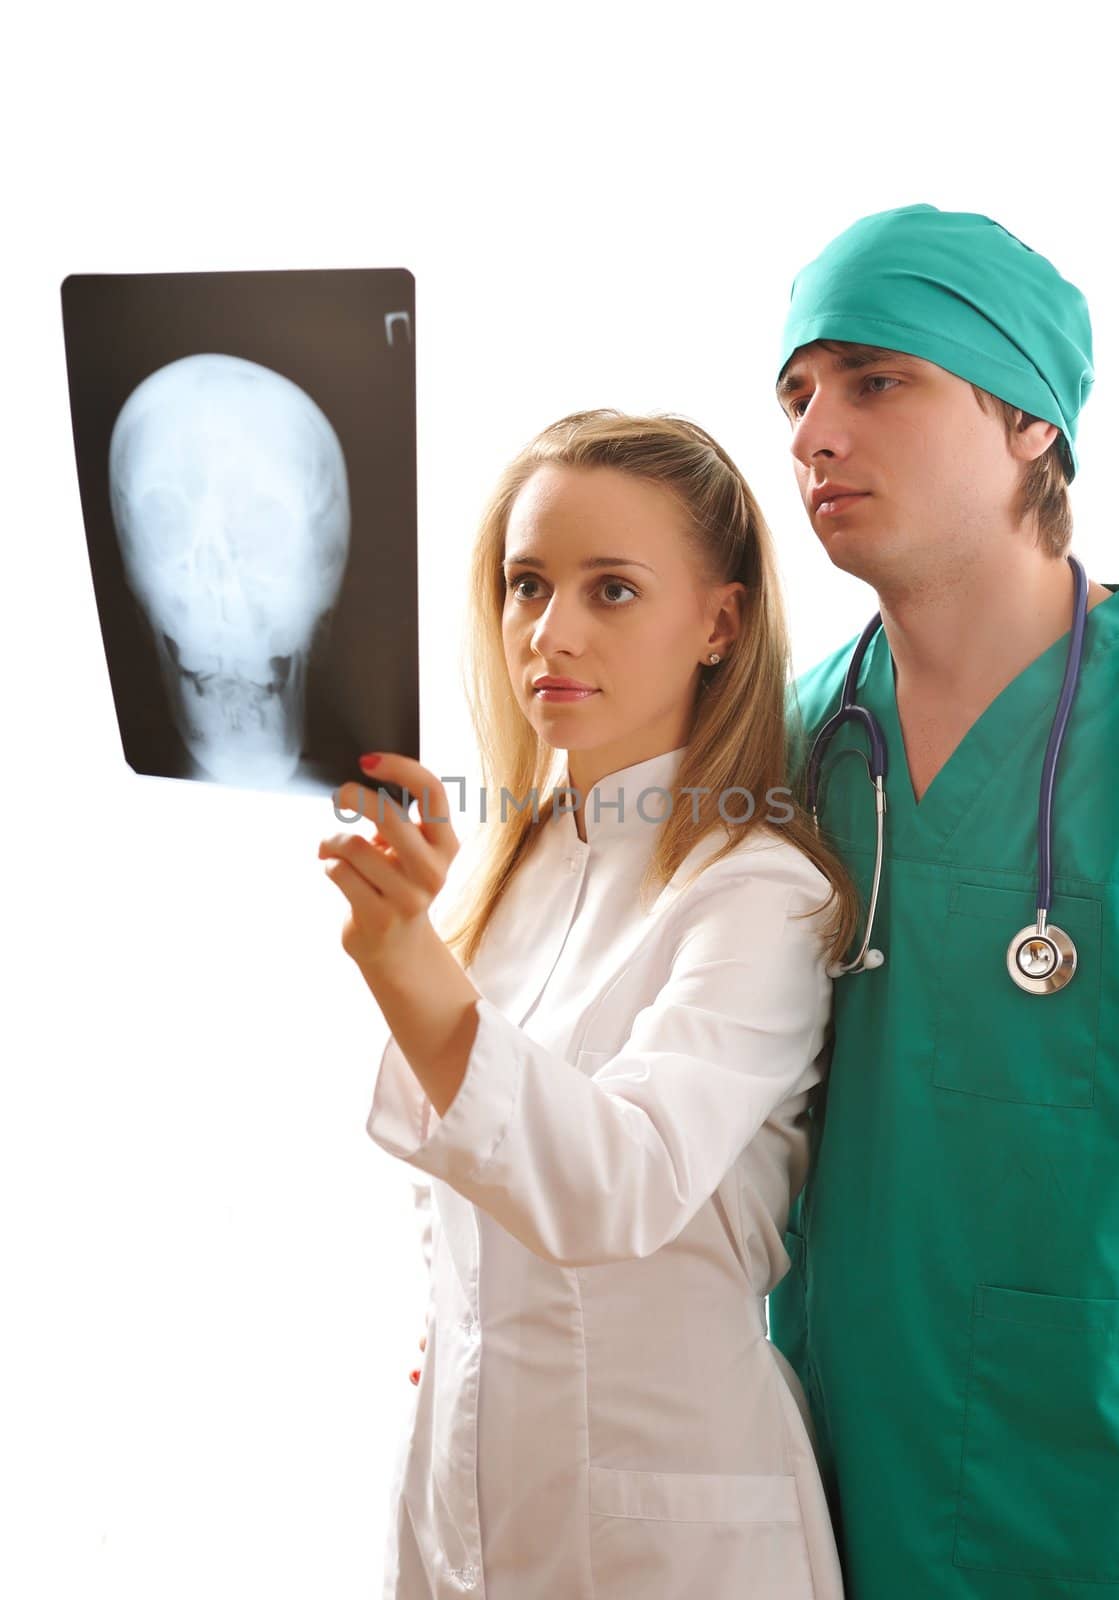 Doctors looking at x-ray (isolated on white)